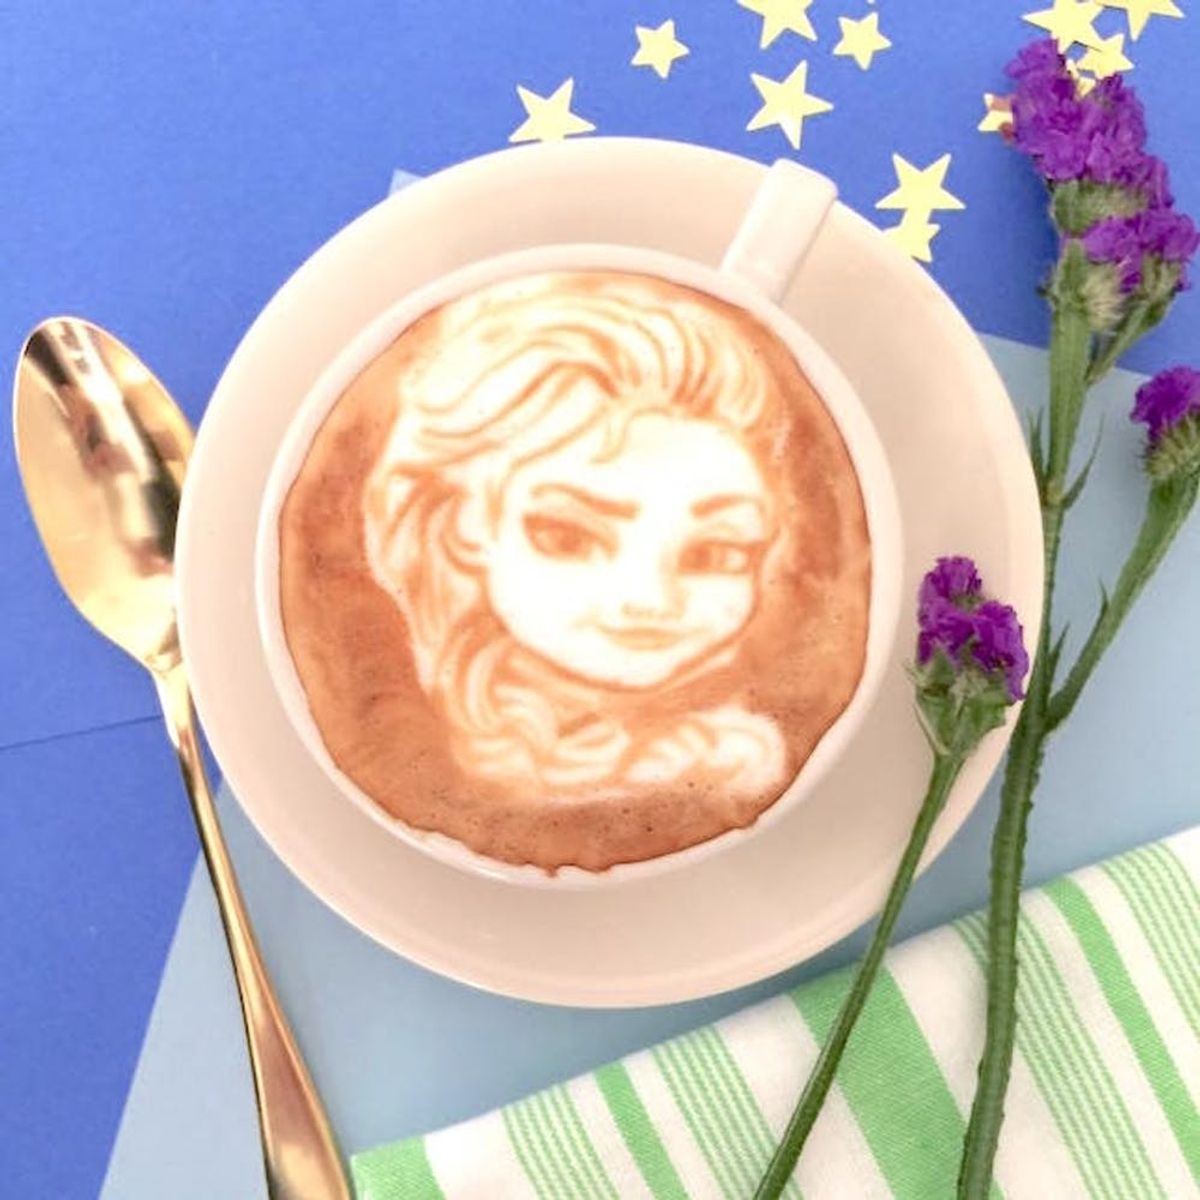 This Brooklyn Barista Created Disney Princess Latte Art Unlike Anything You’ve Ever Seen